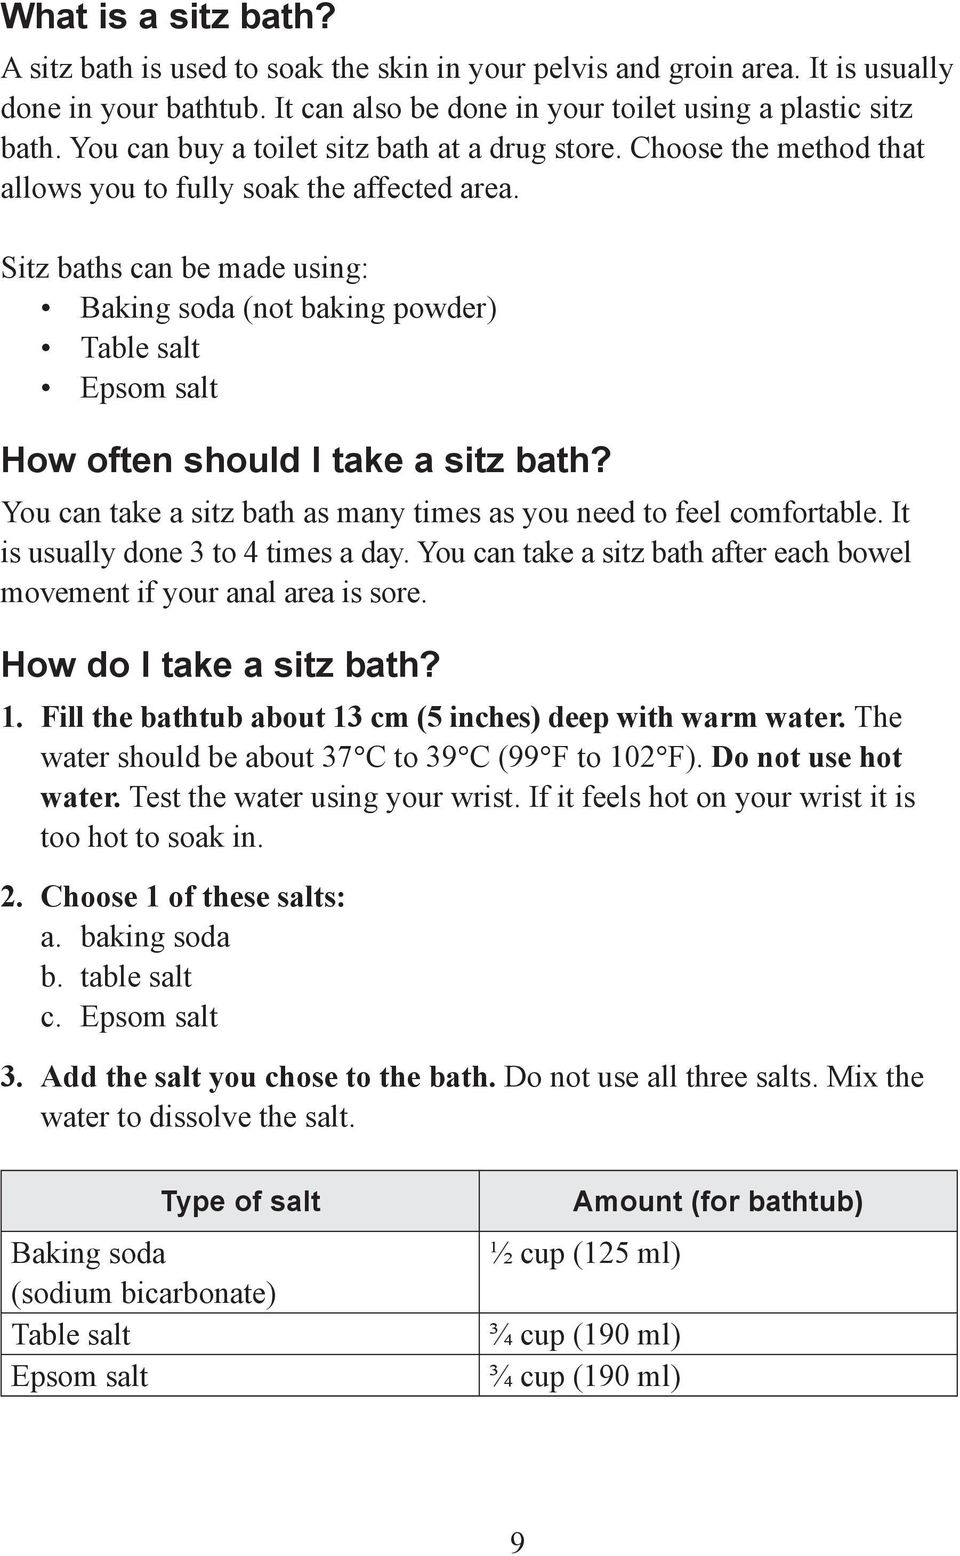 Sitz baths can be made using: Baking soda (not baking powder) Table salt Epsom salt How often should I take a sitz bath? You can take a sitz bath as many times as you need to feel comfortable.